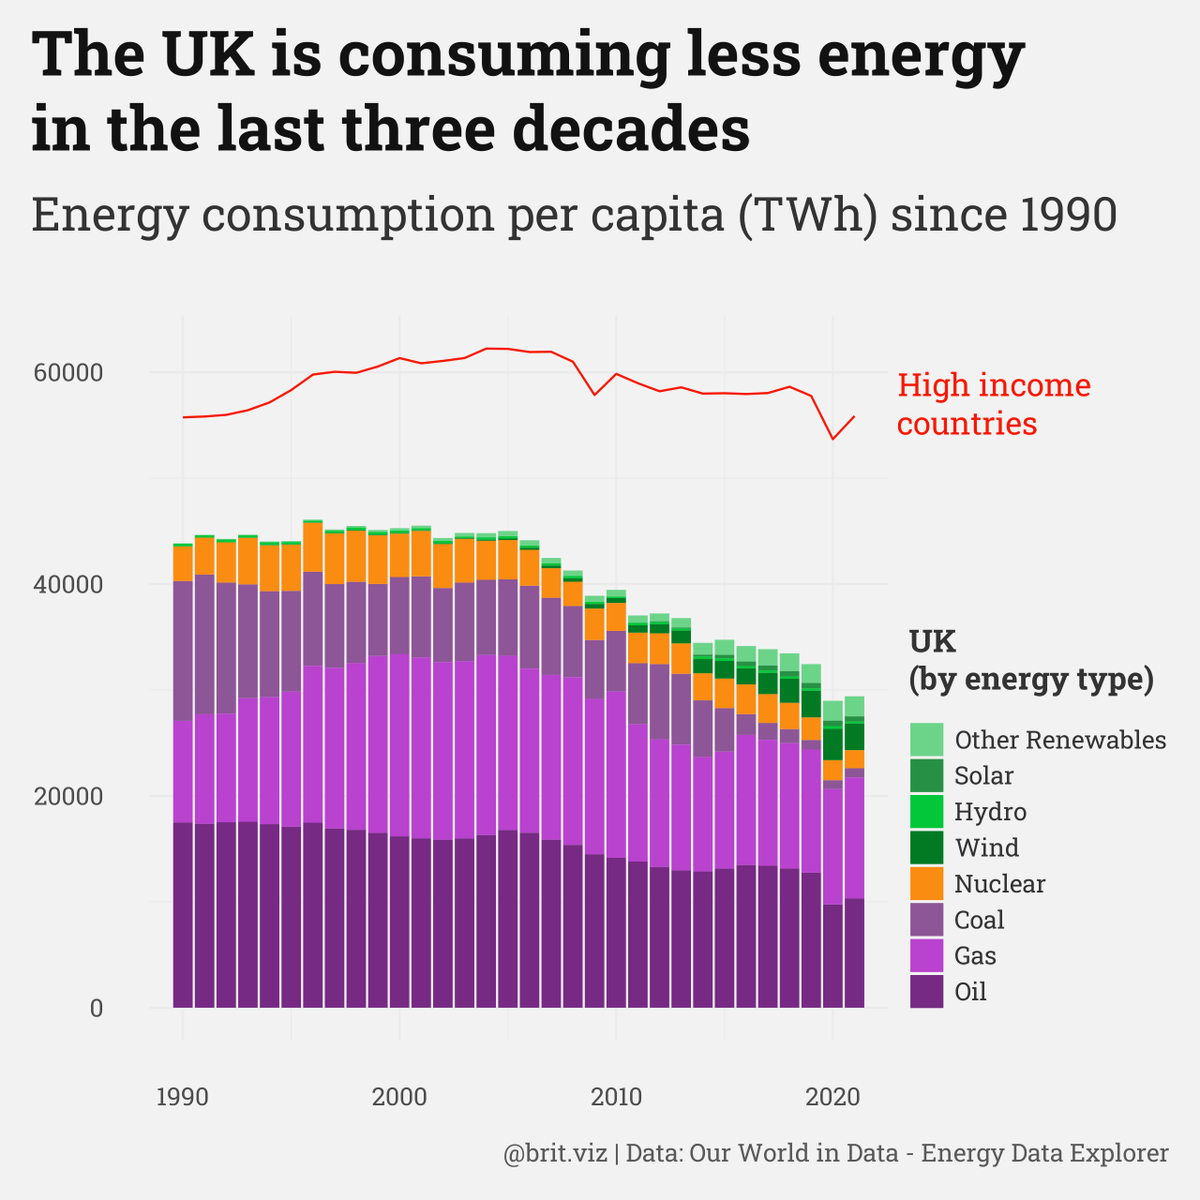 Keep digging old #tidytuesday data to work on. This one is a bit unexpected with the UK energy consumption so low compared to high-income countries in general. 

#r #rstats #dataviz #datavisualization